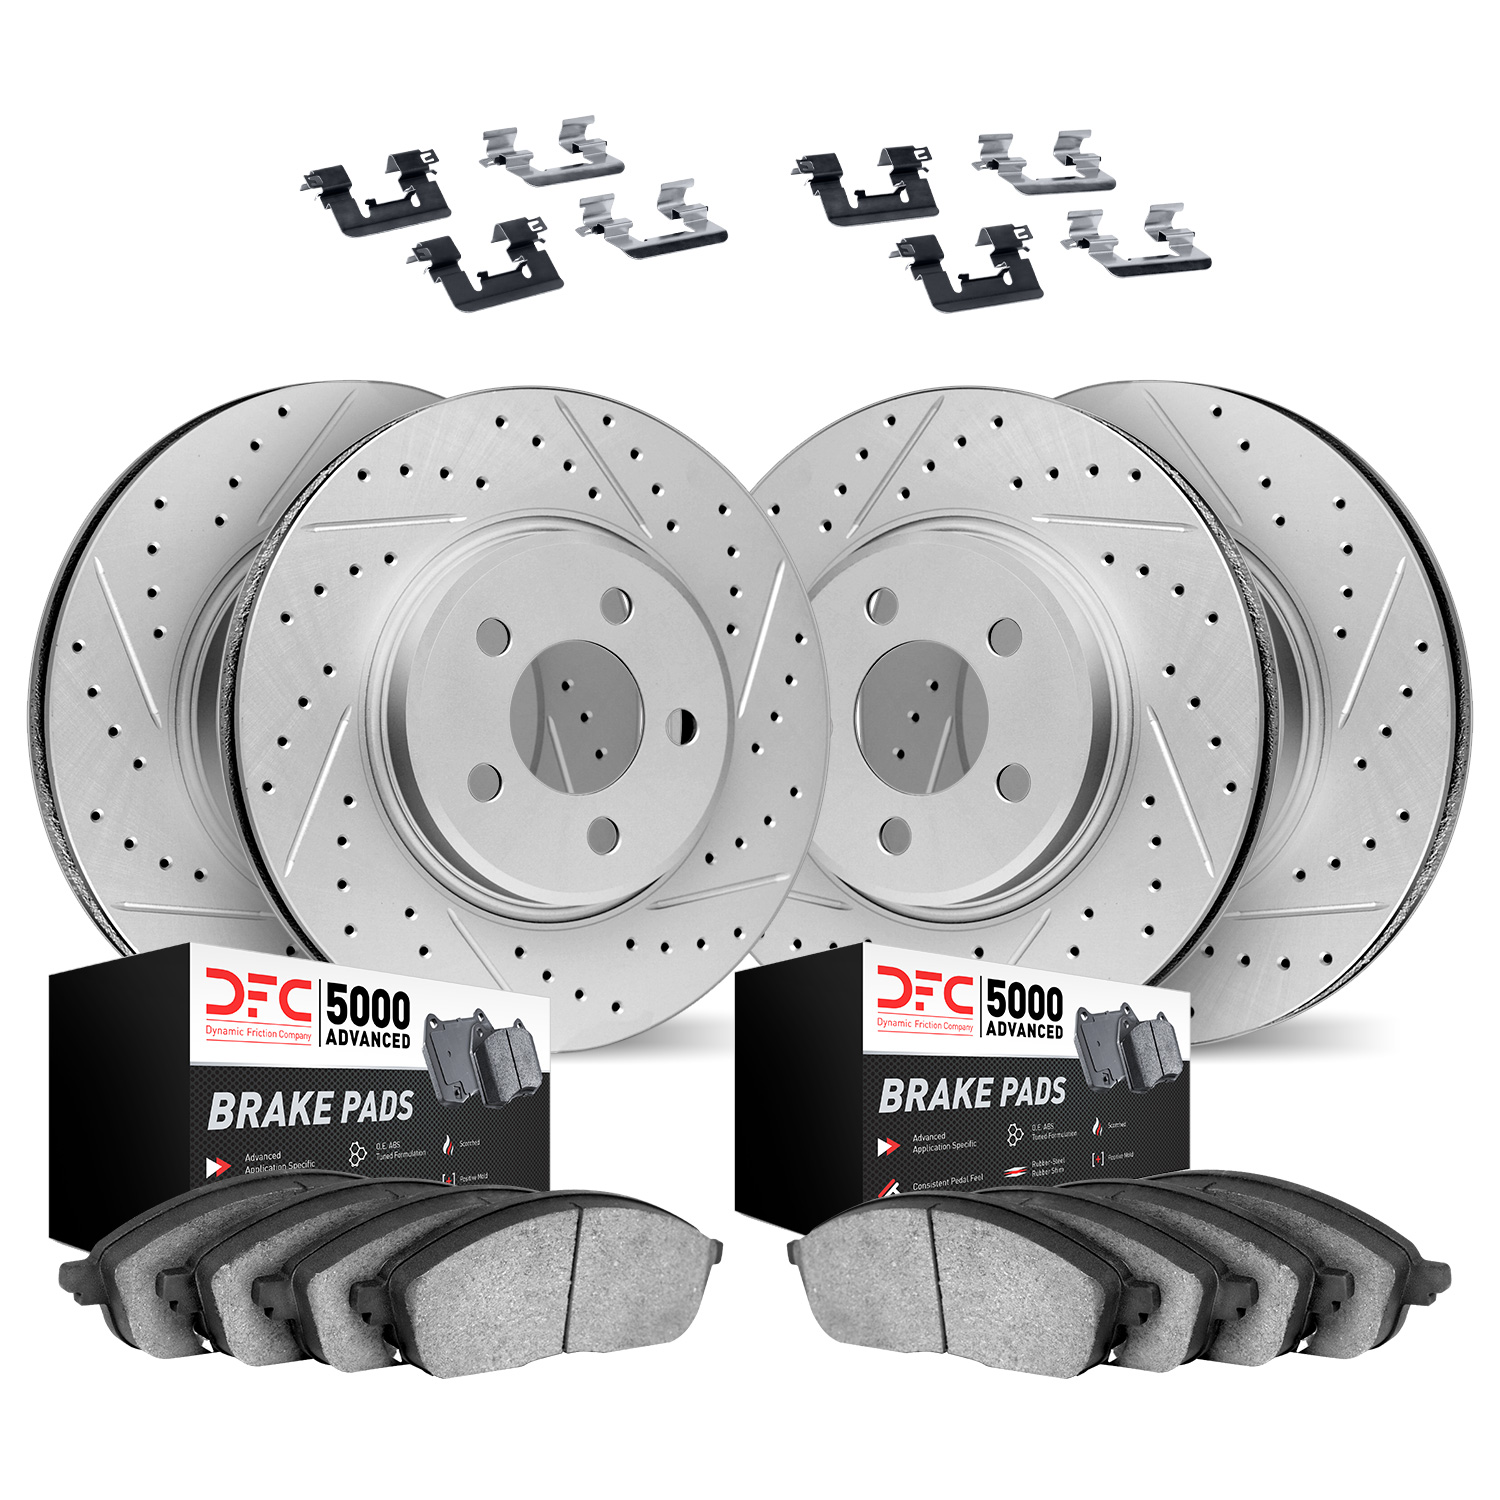 2514-11006 Geoperformance Drilled/Slotted Rotors w/5000 Advanced Brake Pads Kit & Hardware, 2010-2012 Land Rover, Position: Fron